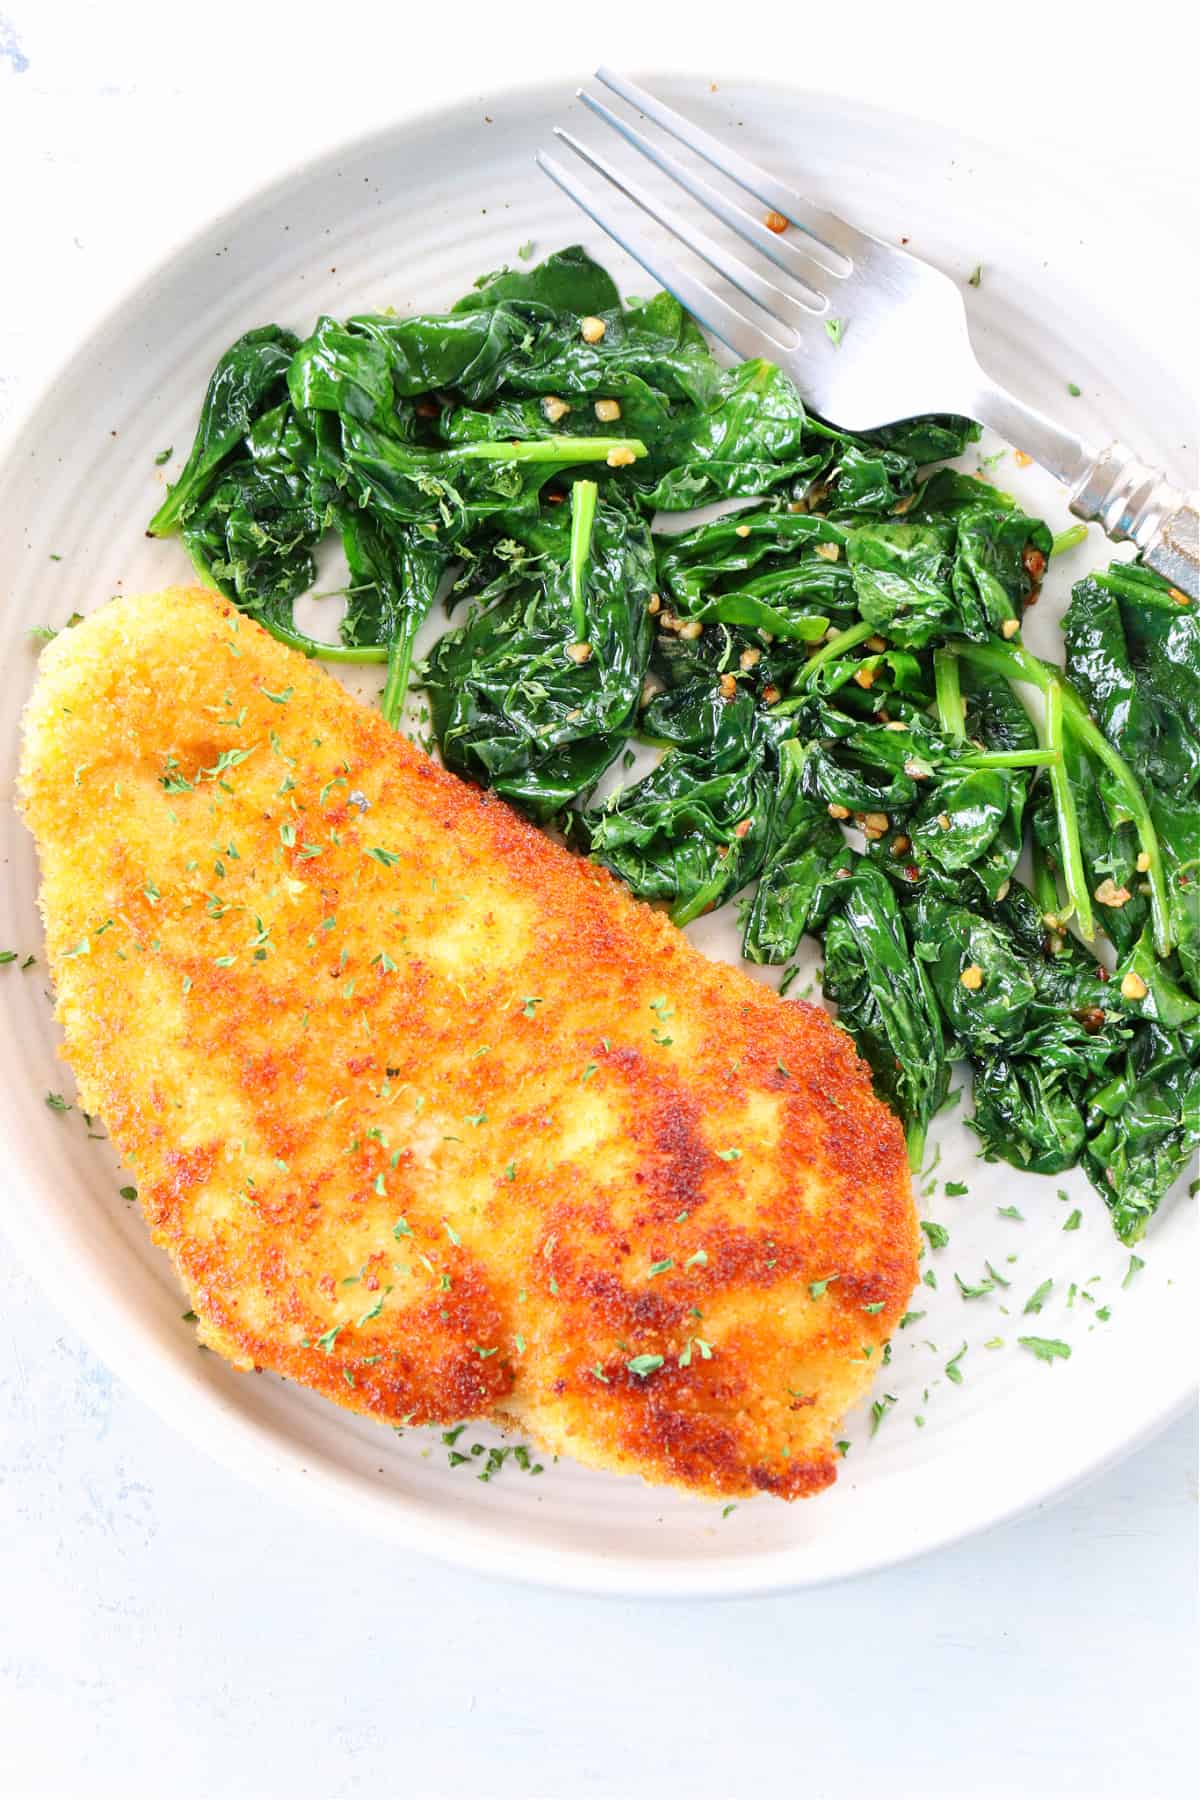 Breaded chicken and sauteed spinach on plate.